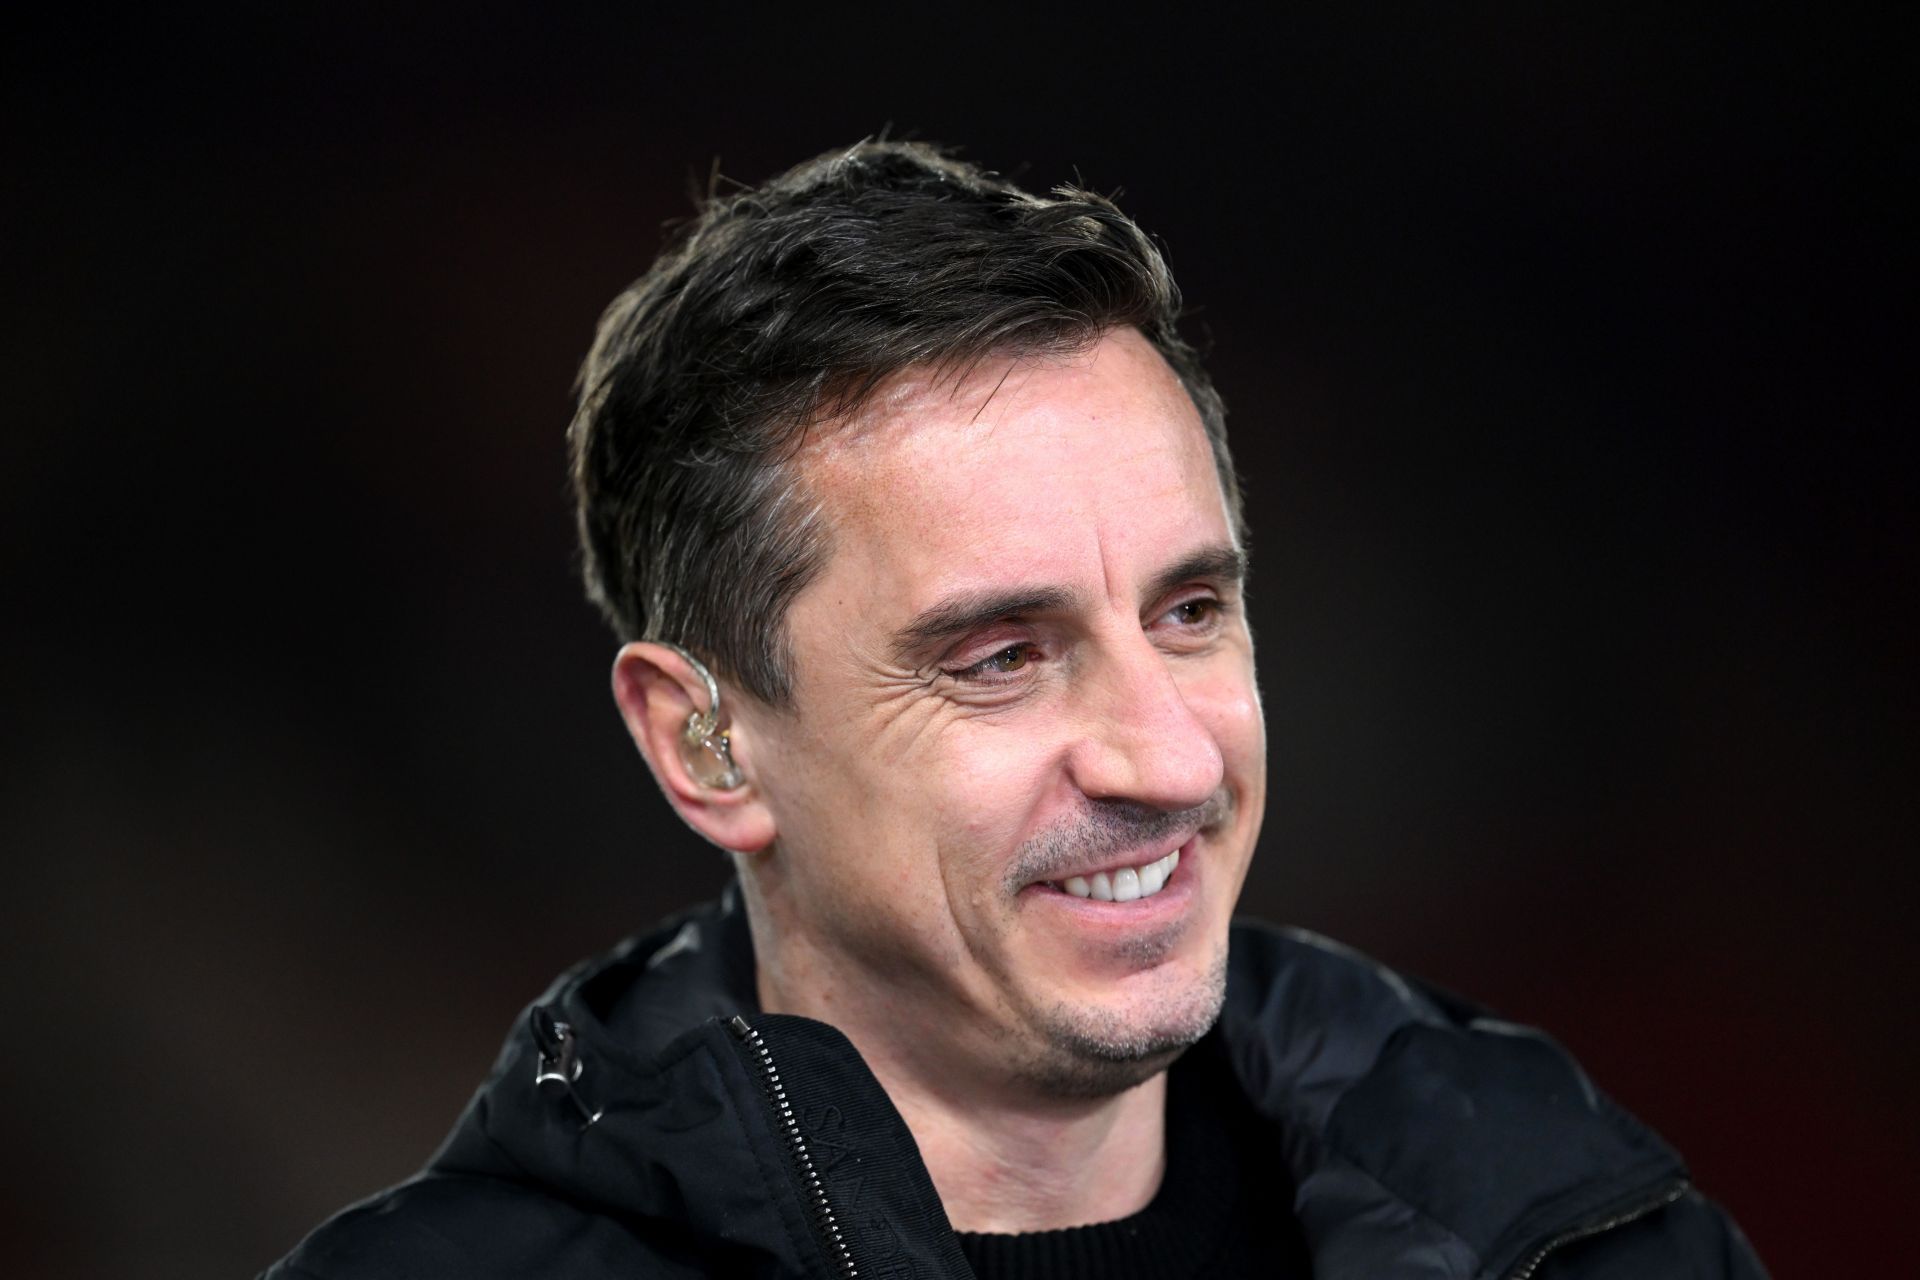 Gary Neville believes his former could should have brought in a striker in January.